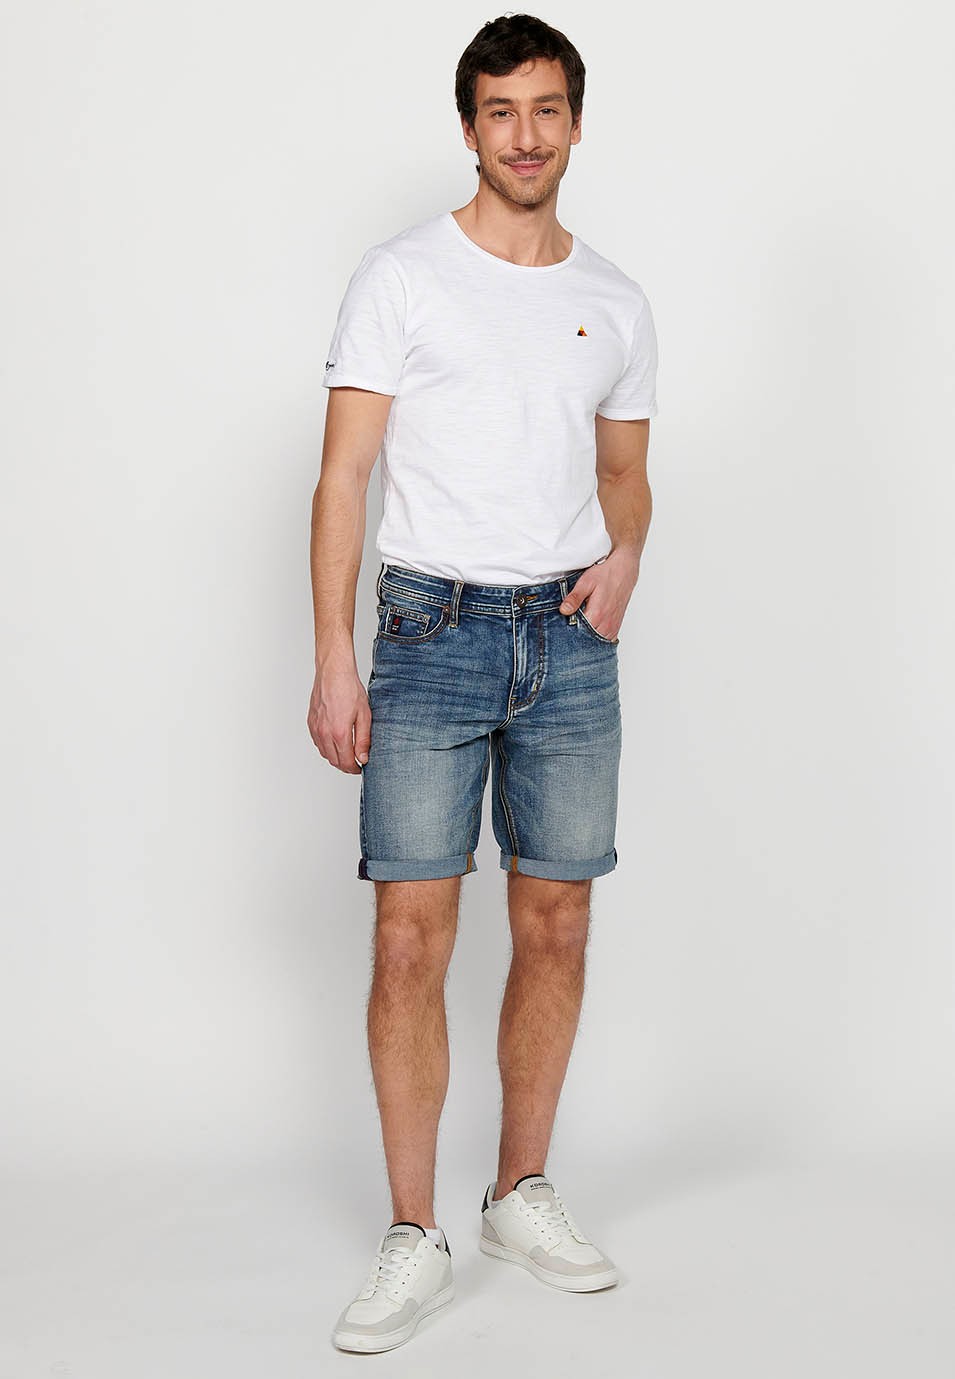 Denim Bermuda Shorts with Front Closure with Zipper and Button with Five Pockets, One Pocket Pocket, Blue Color for Men